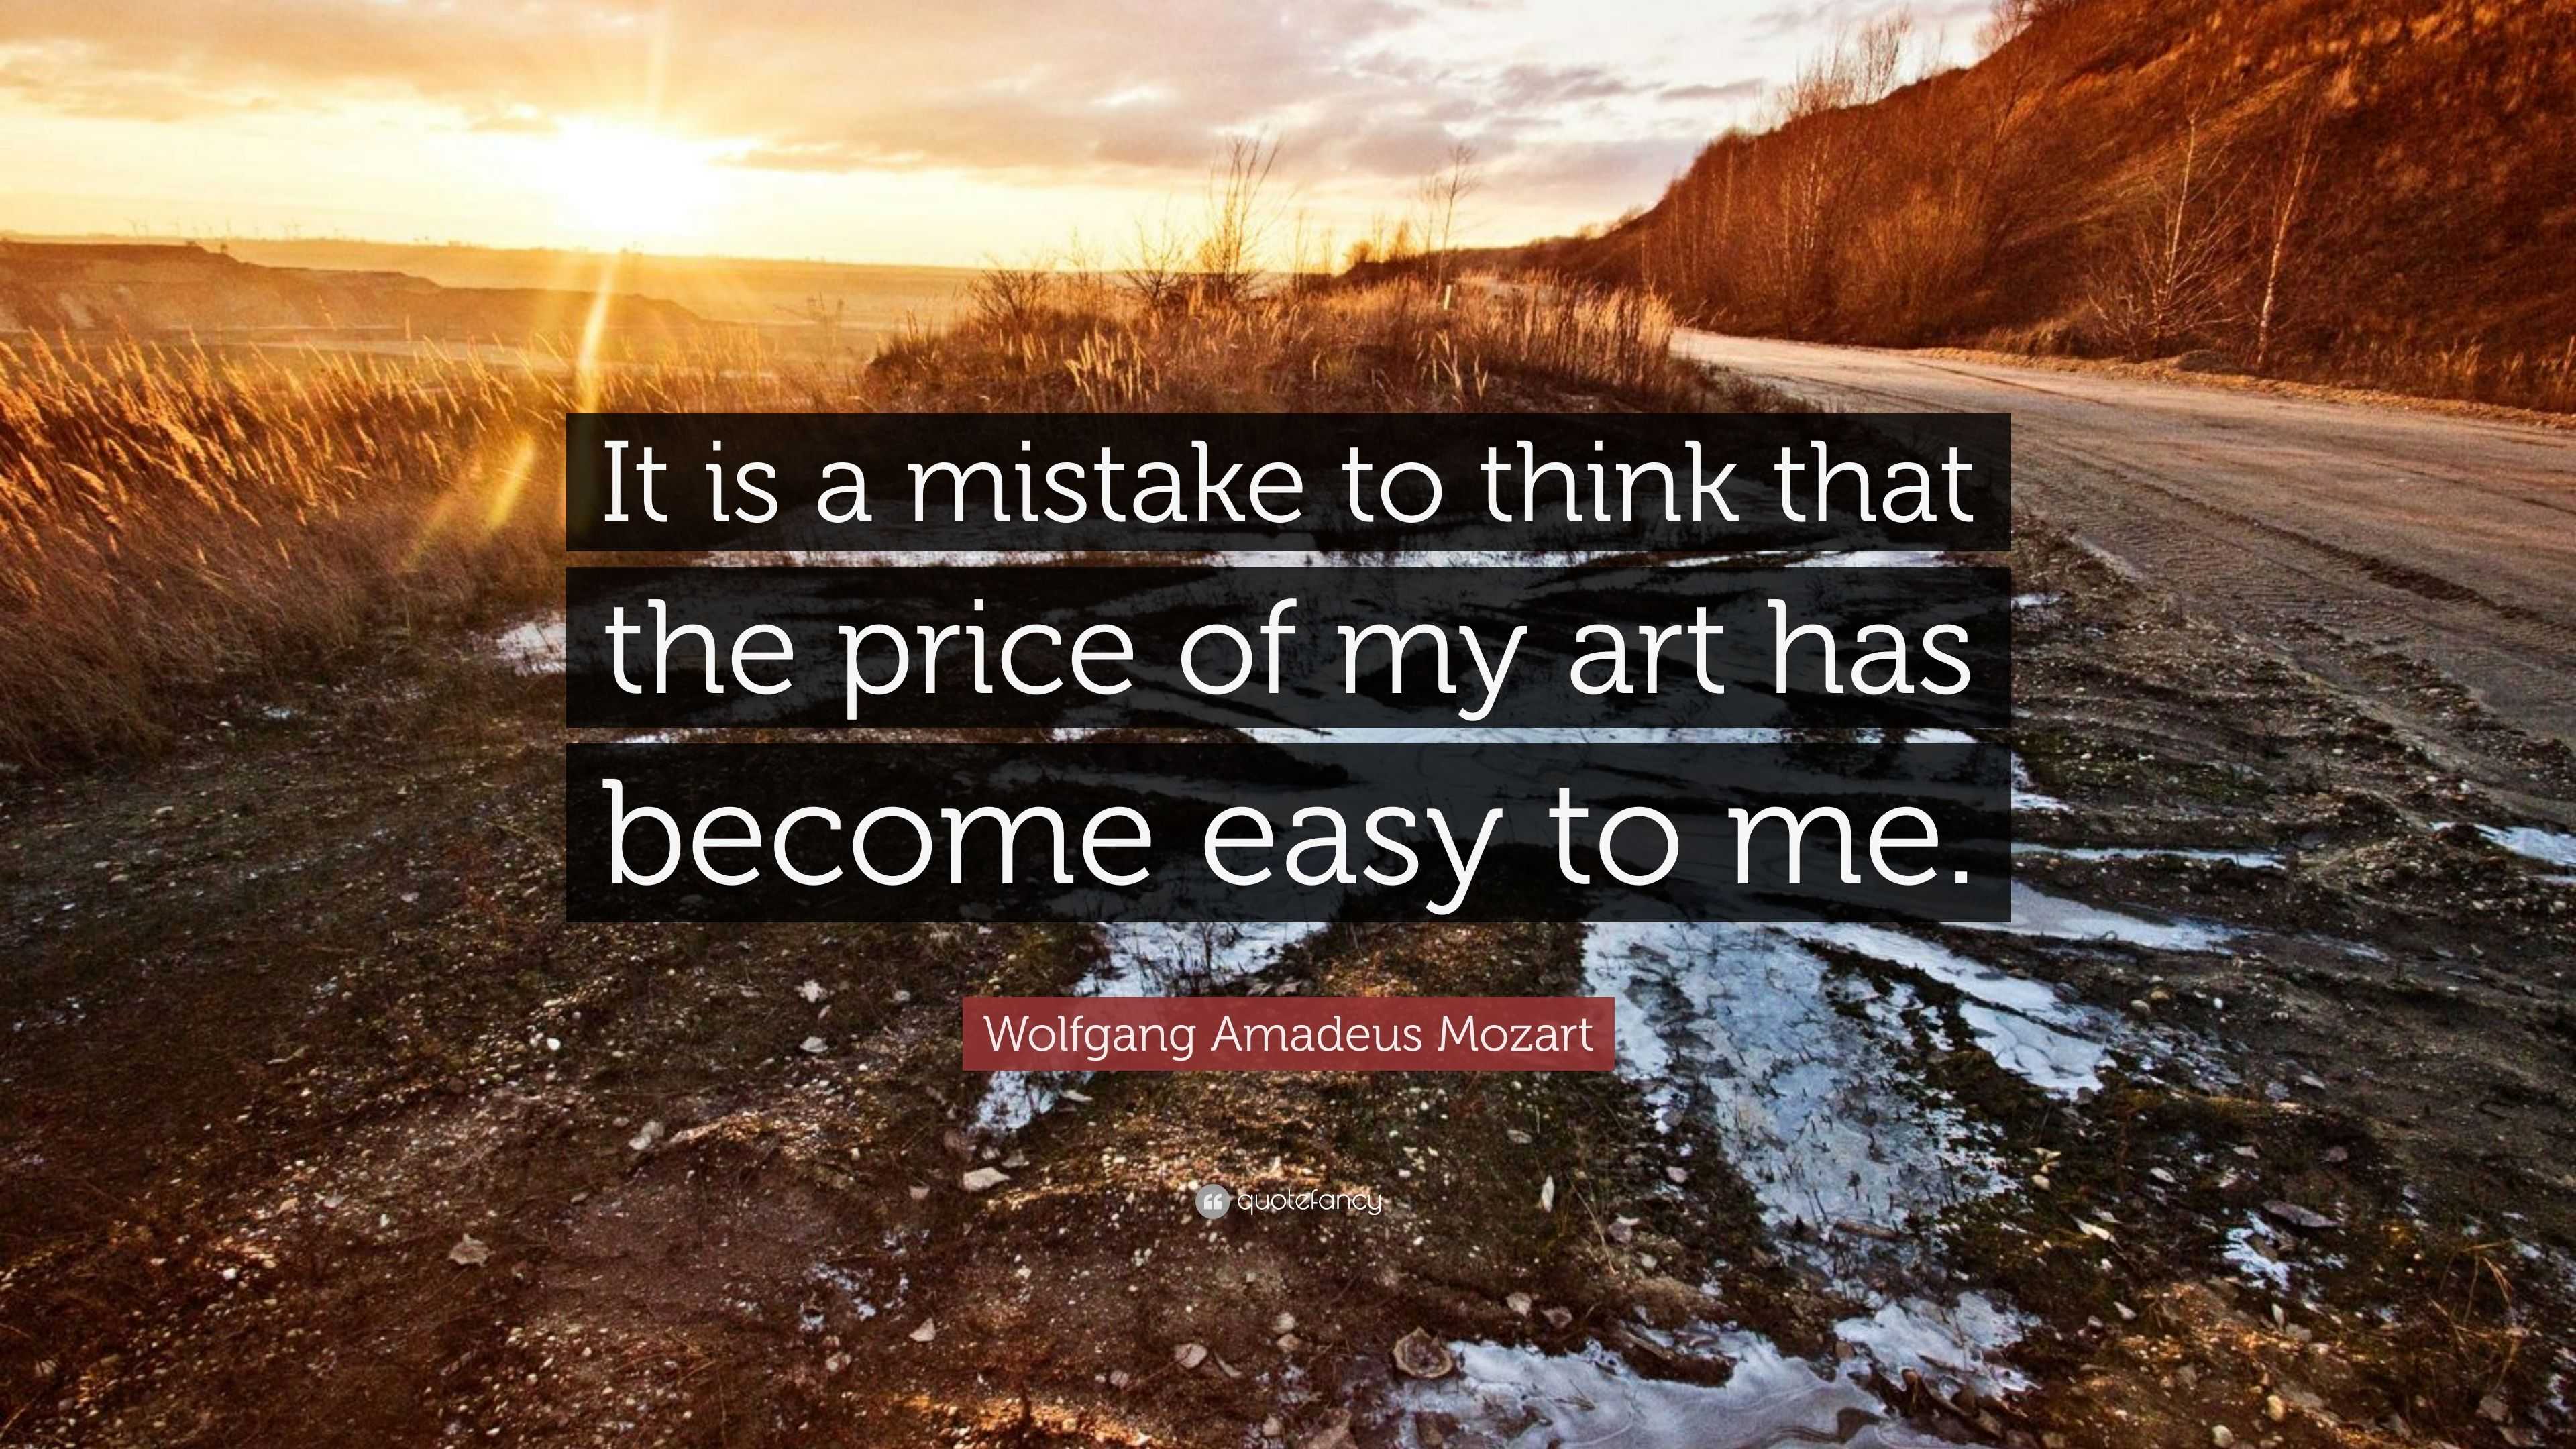 Wolfgang Amadeus Mozart Quote: “It is a mistake to think that the price ...